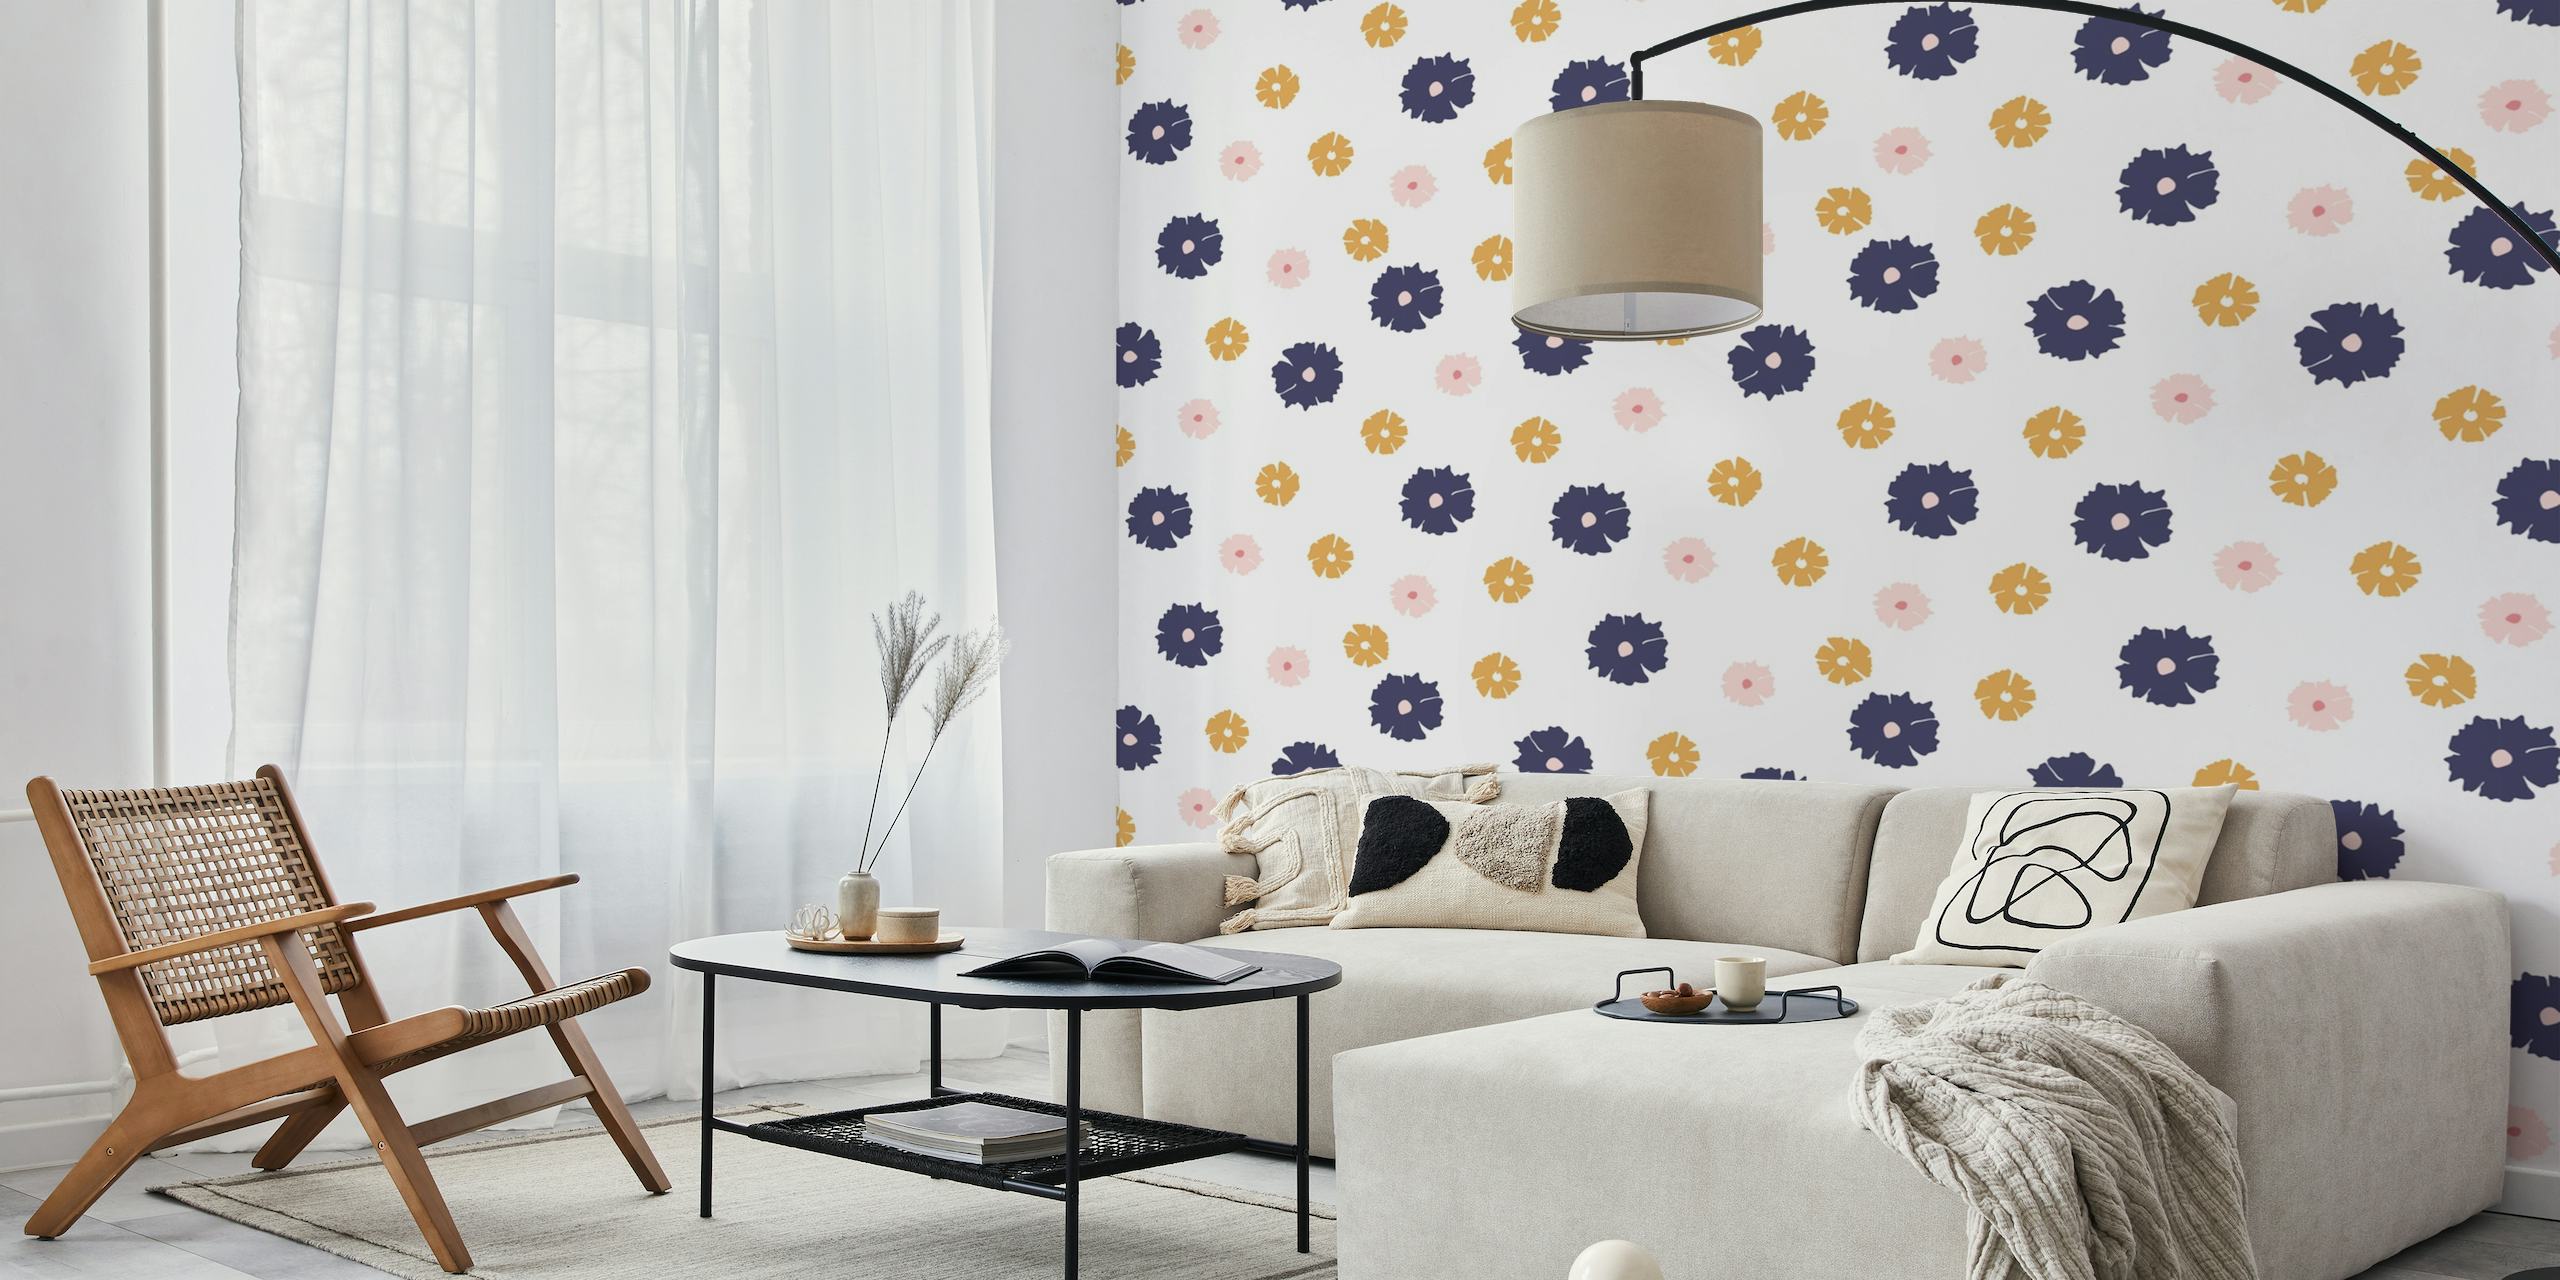 Floral pattern wall mural with blue and yellow flowers for home decor